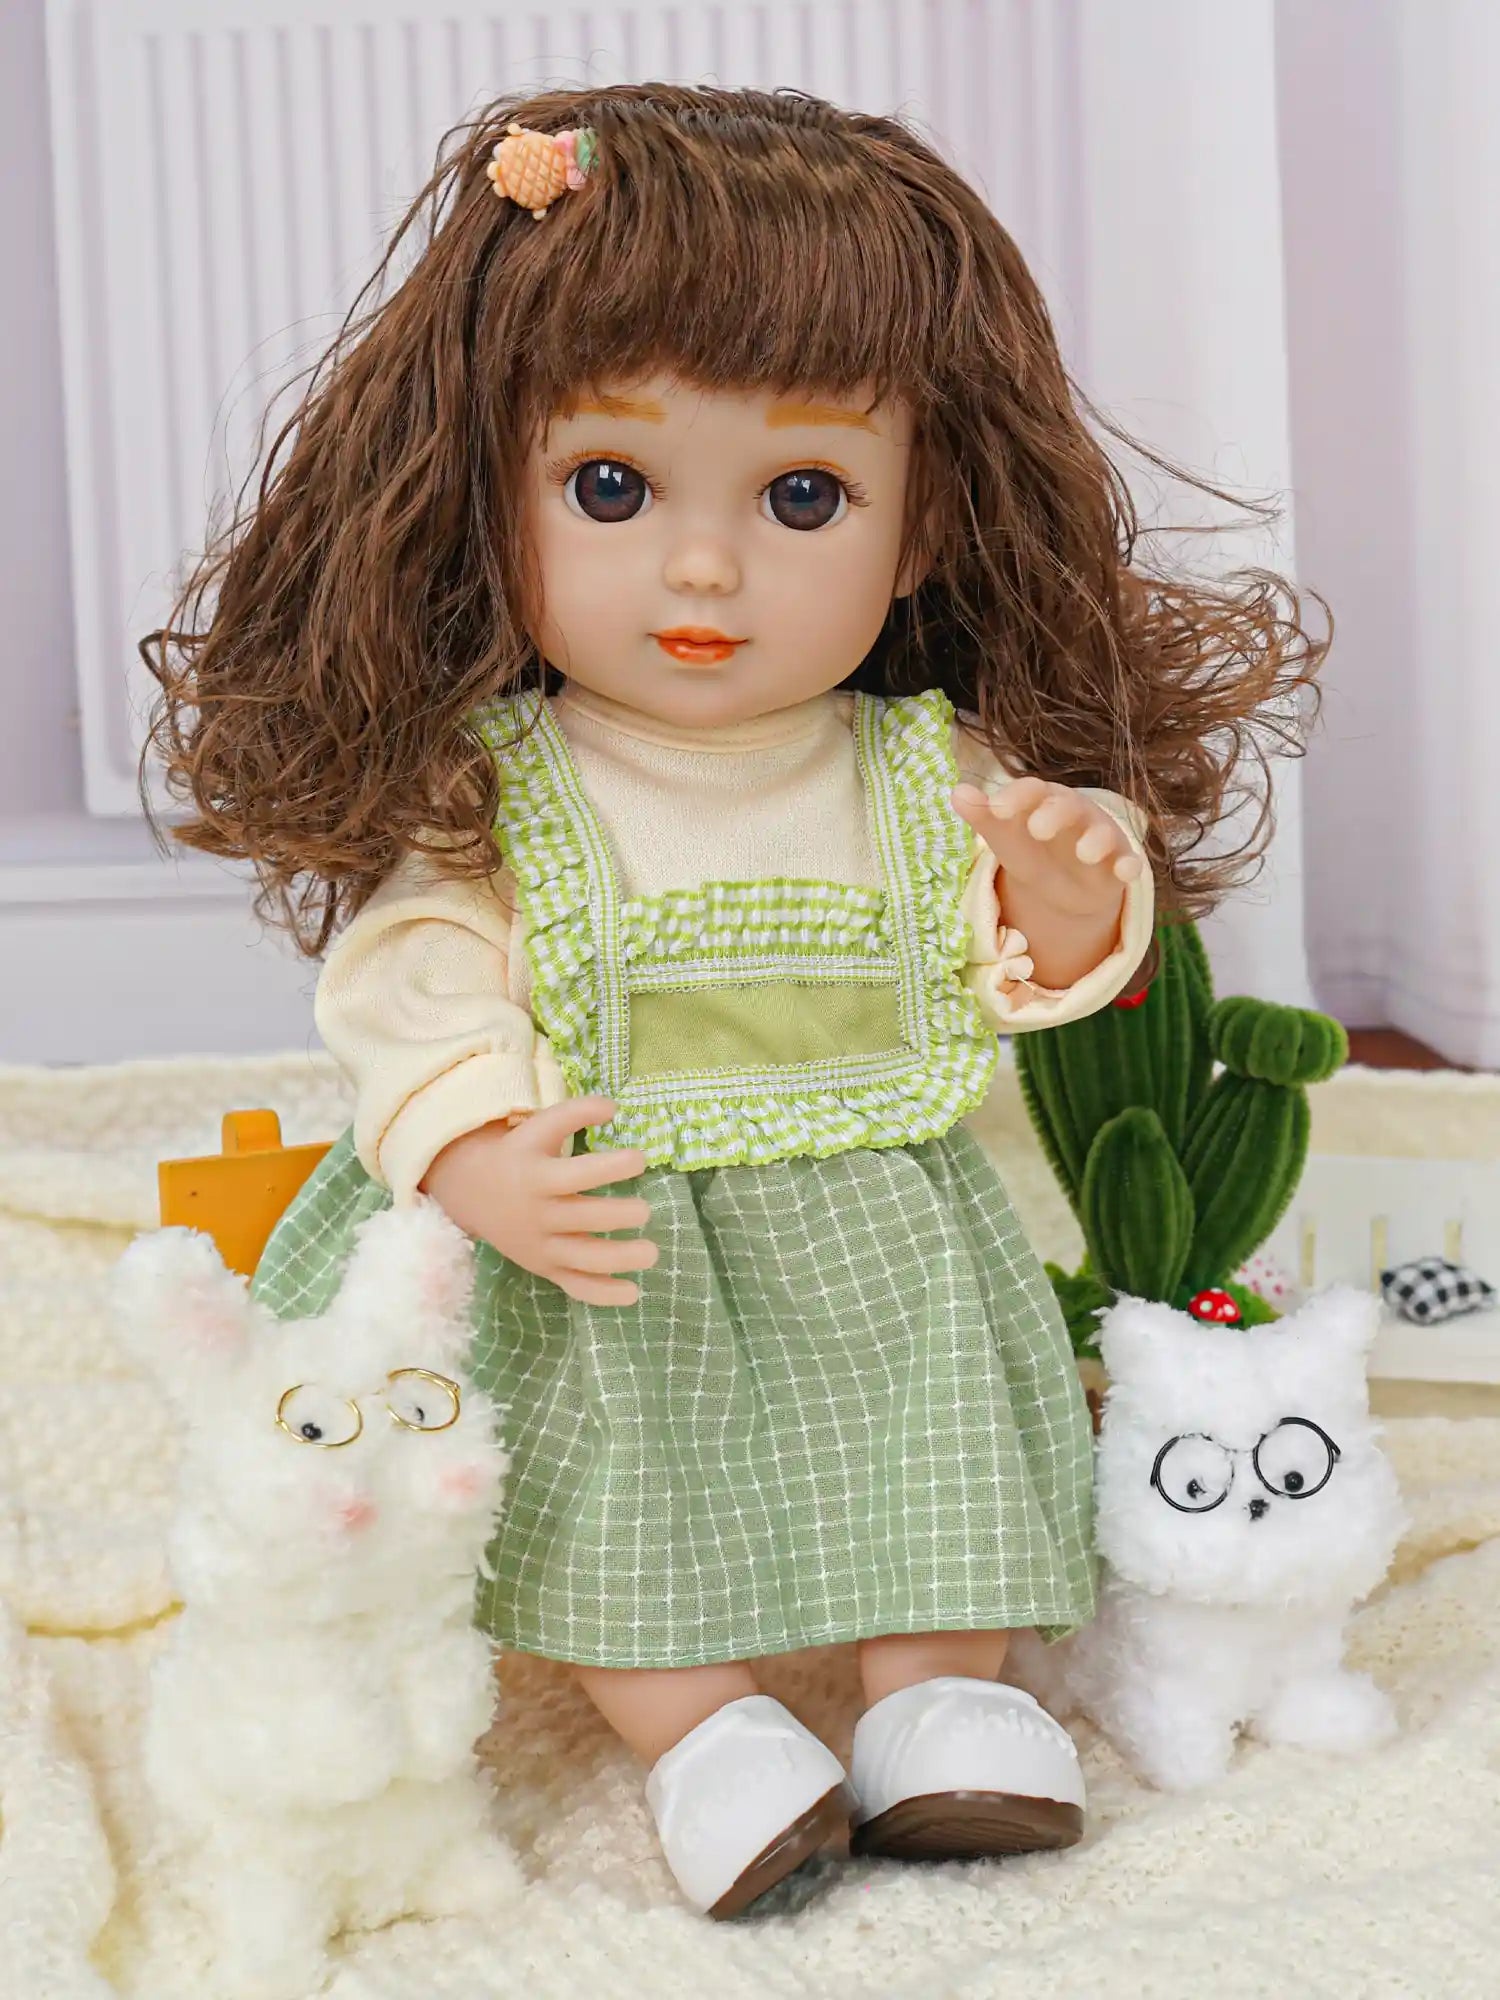 Doll with wavy brown hair, green checked dress, with plush dog and cactus.